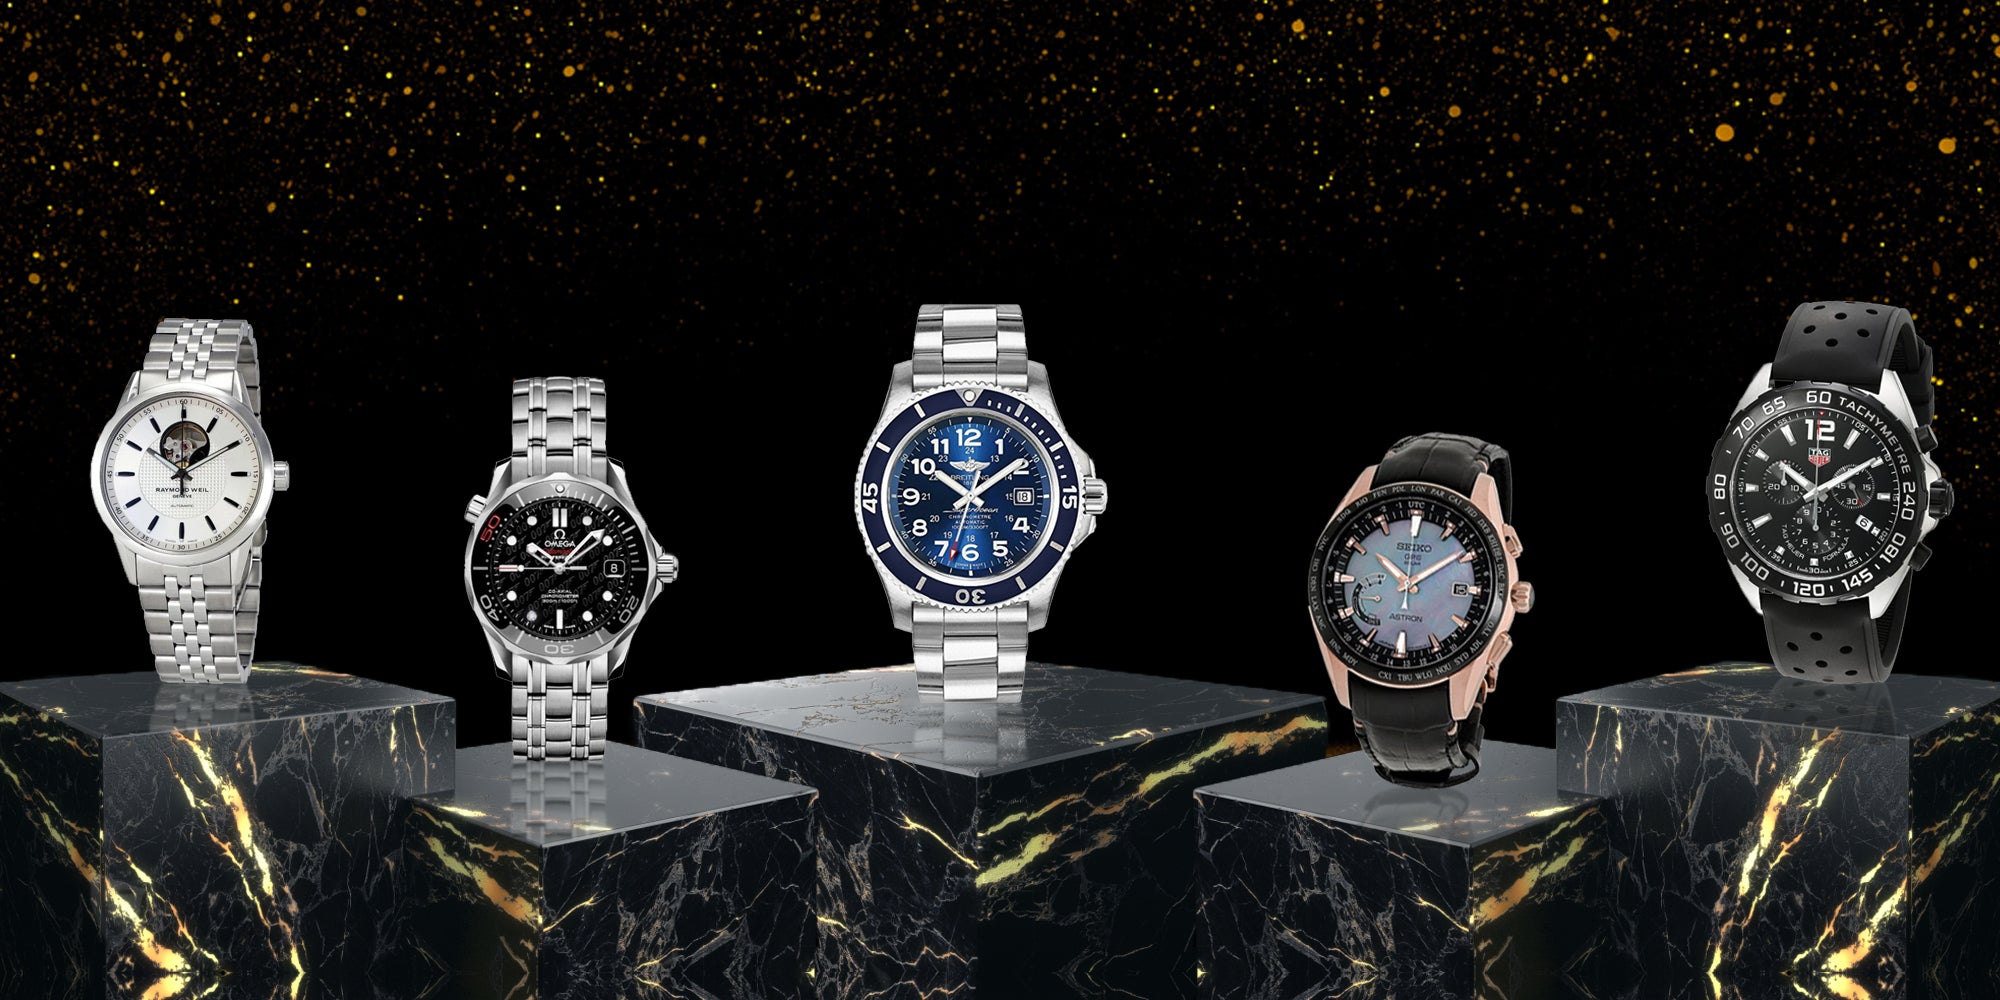 Top Five Men's Luxury Watches For the Holidays